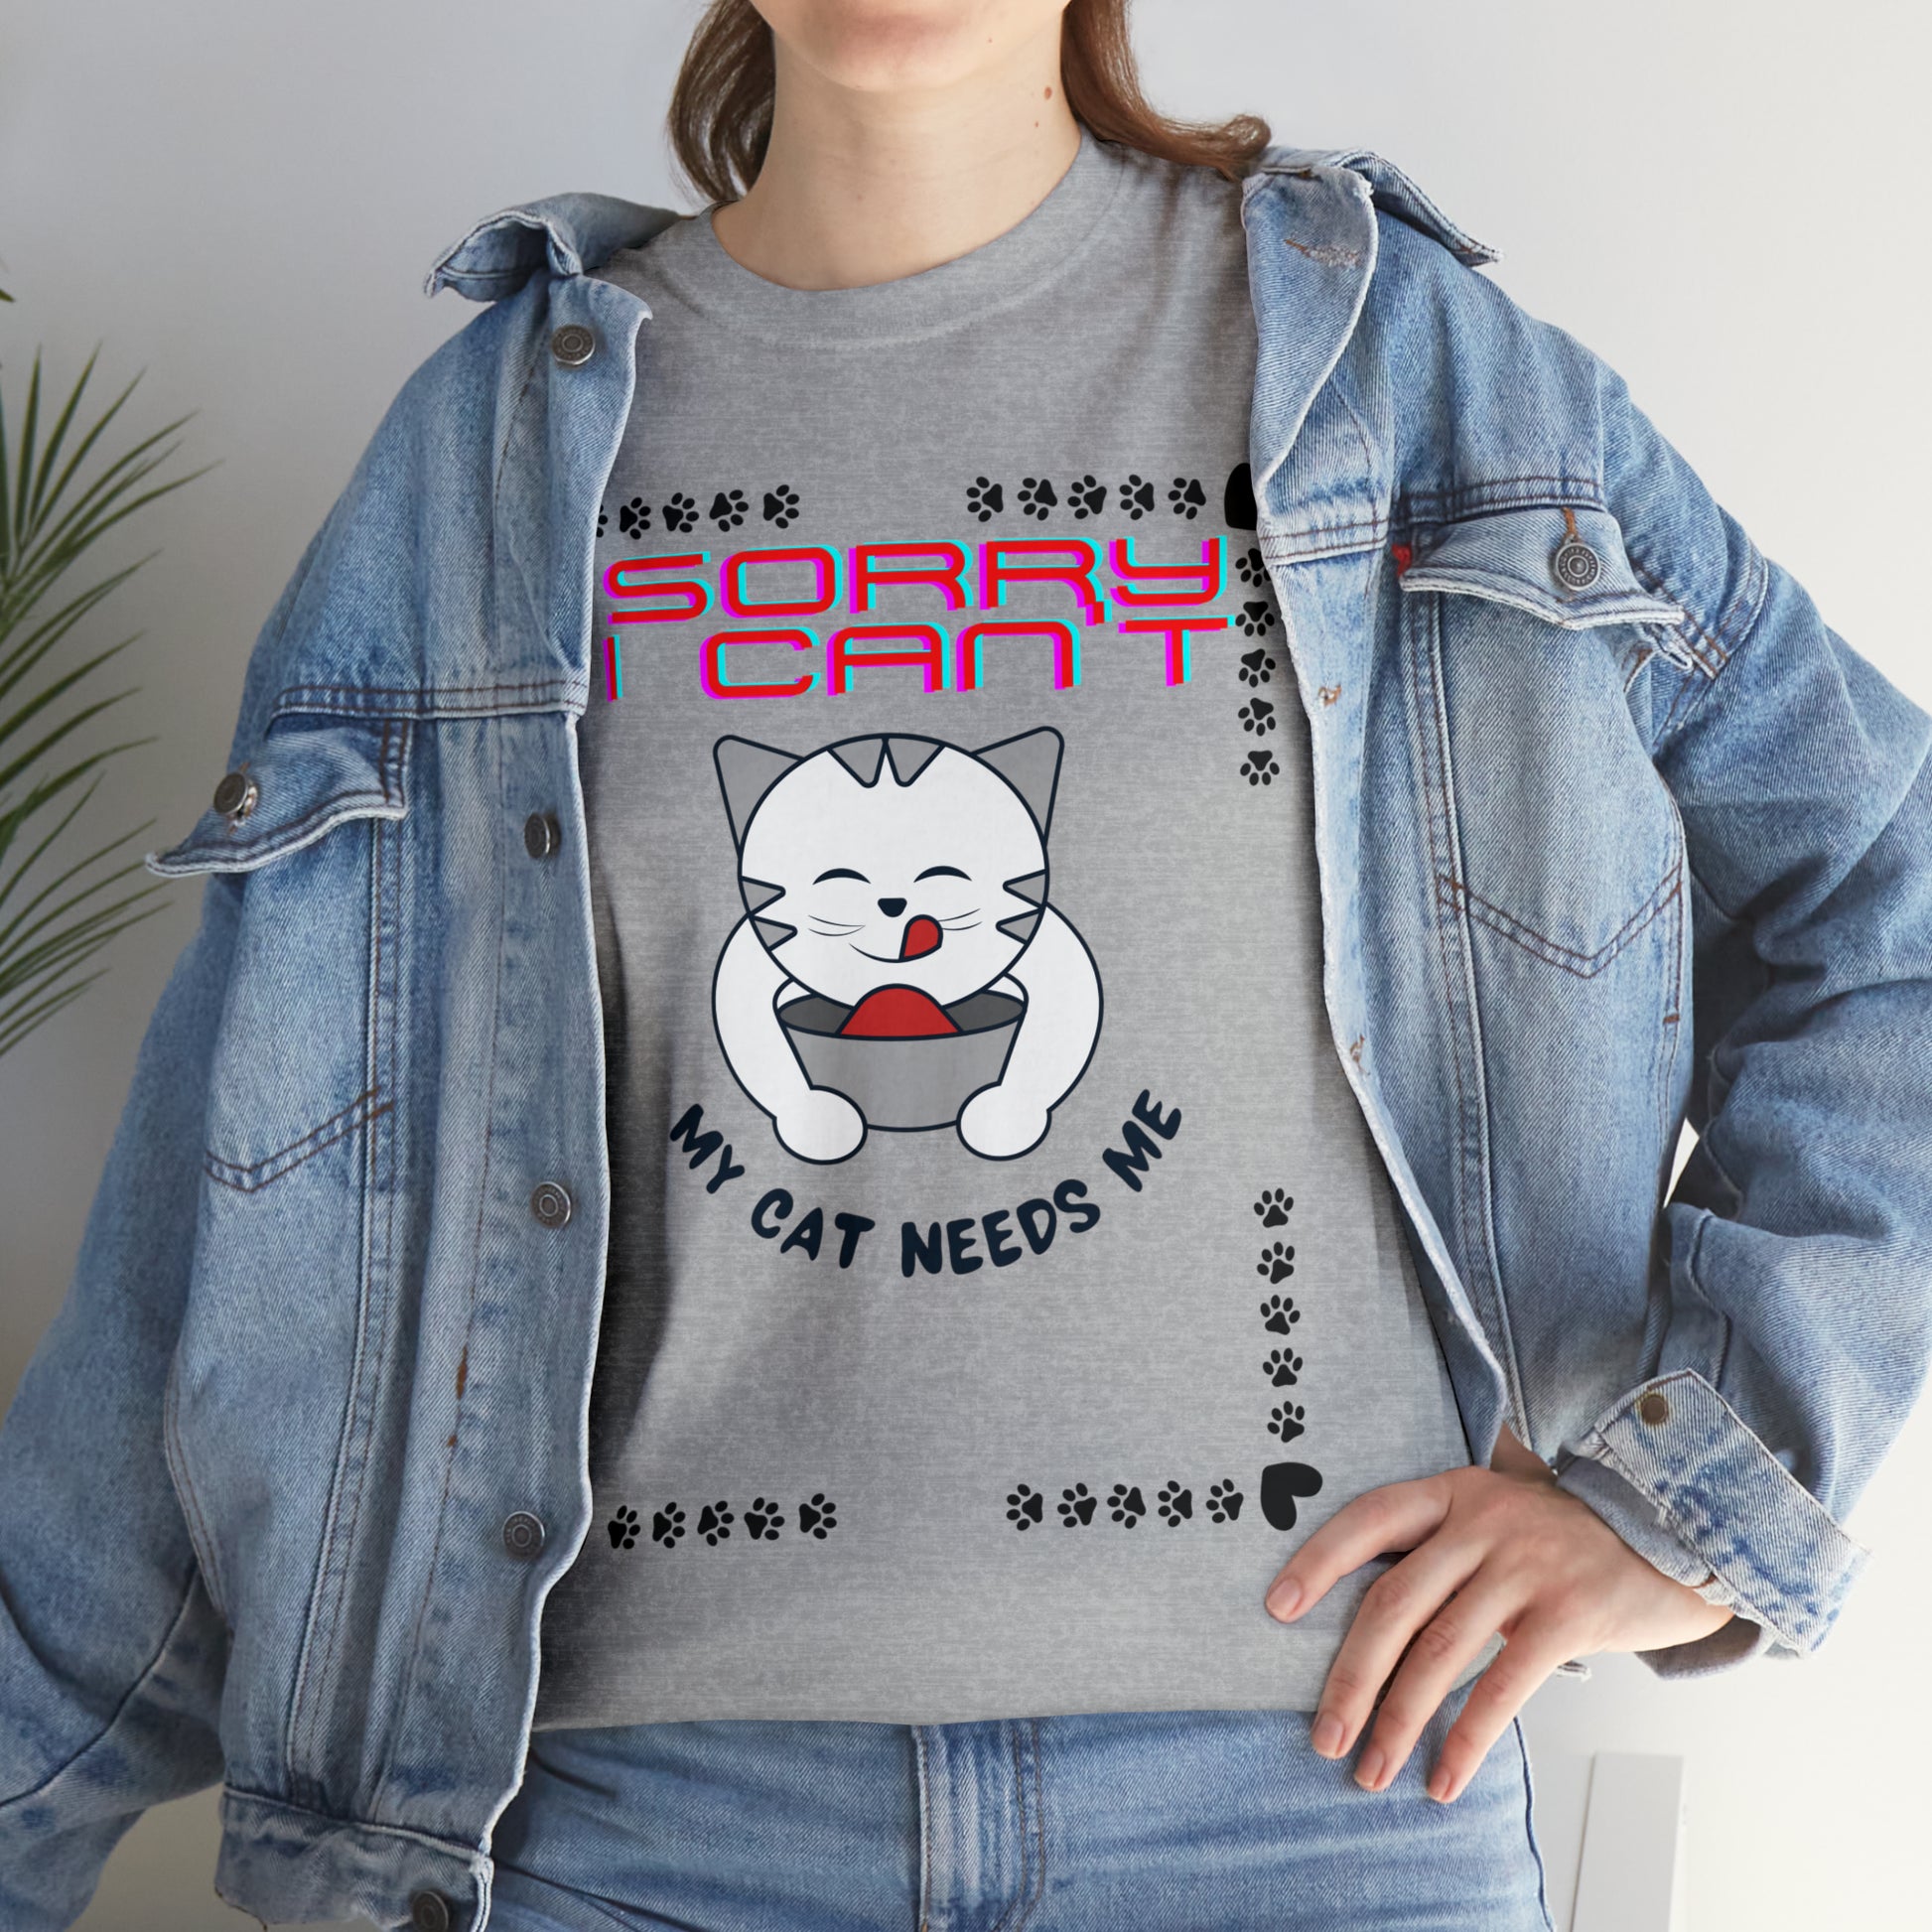 Sorry I Can't My Cat Needs Me T-Shirt | Cat Mom Shirt | Cat Lover Gift | Cat Mom Gift | Animal Lover Gift for Women T-Shirt   